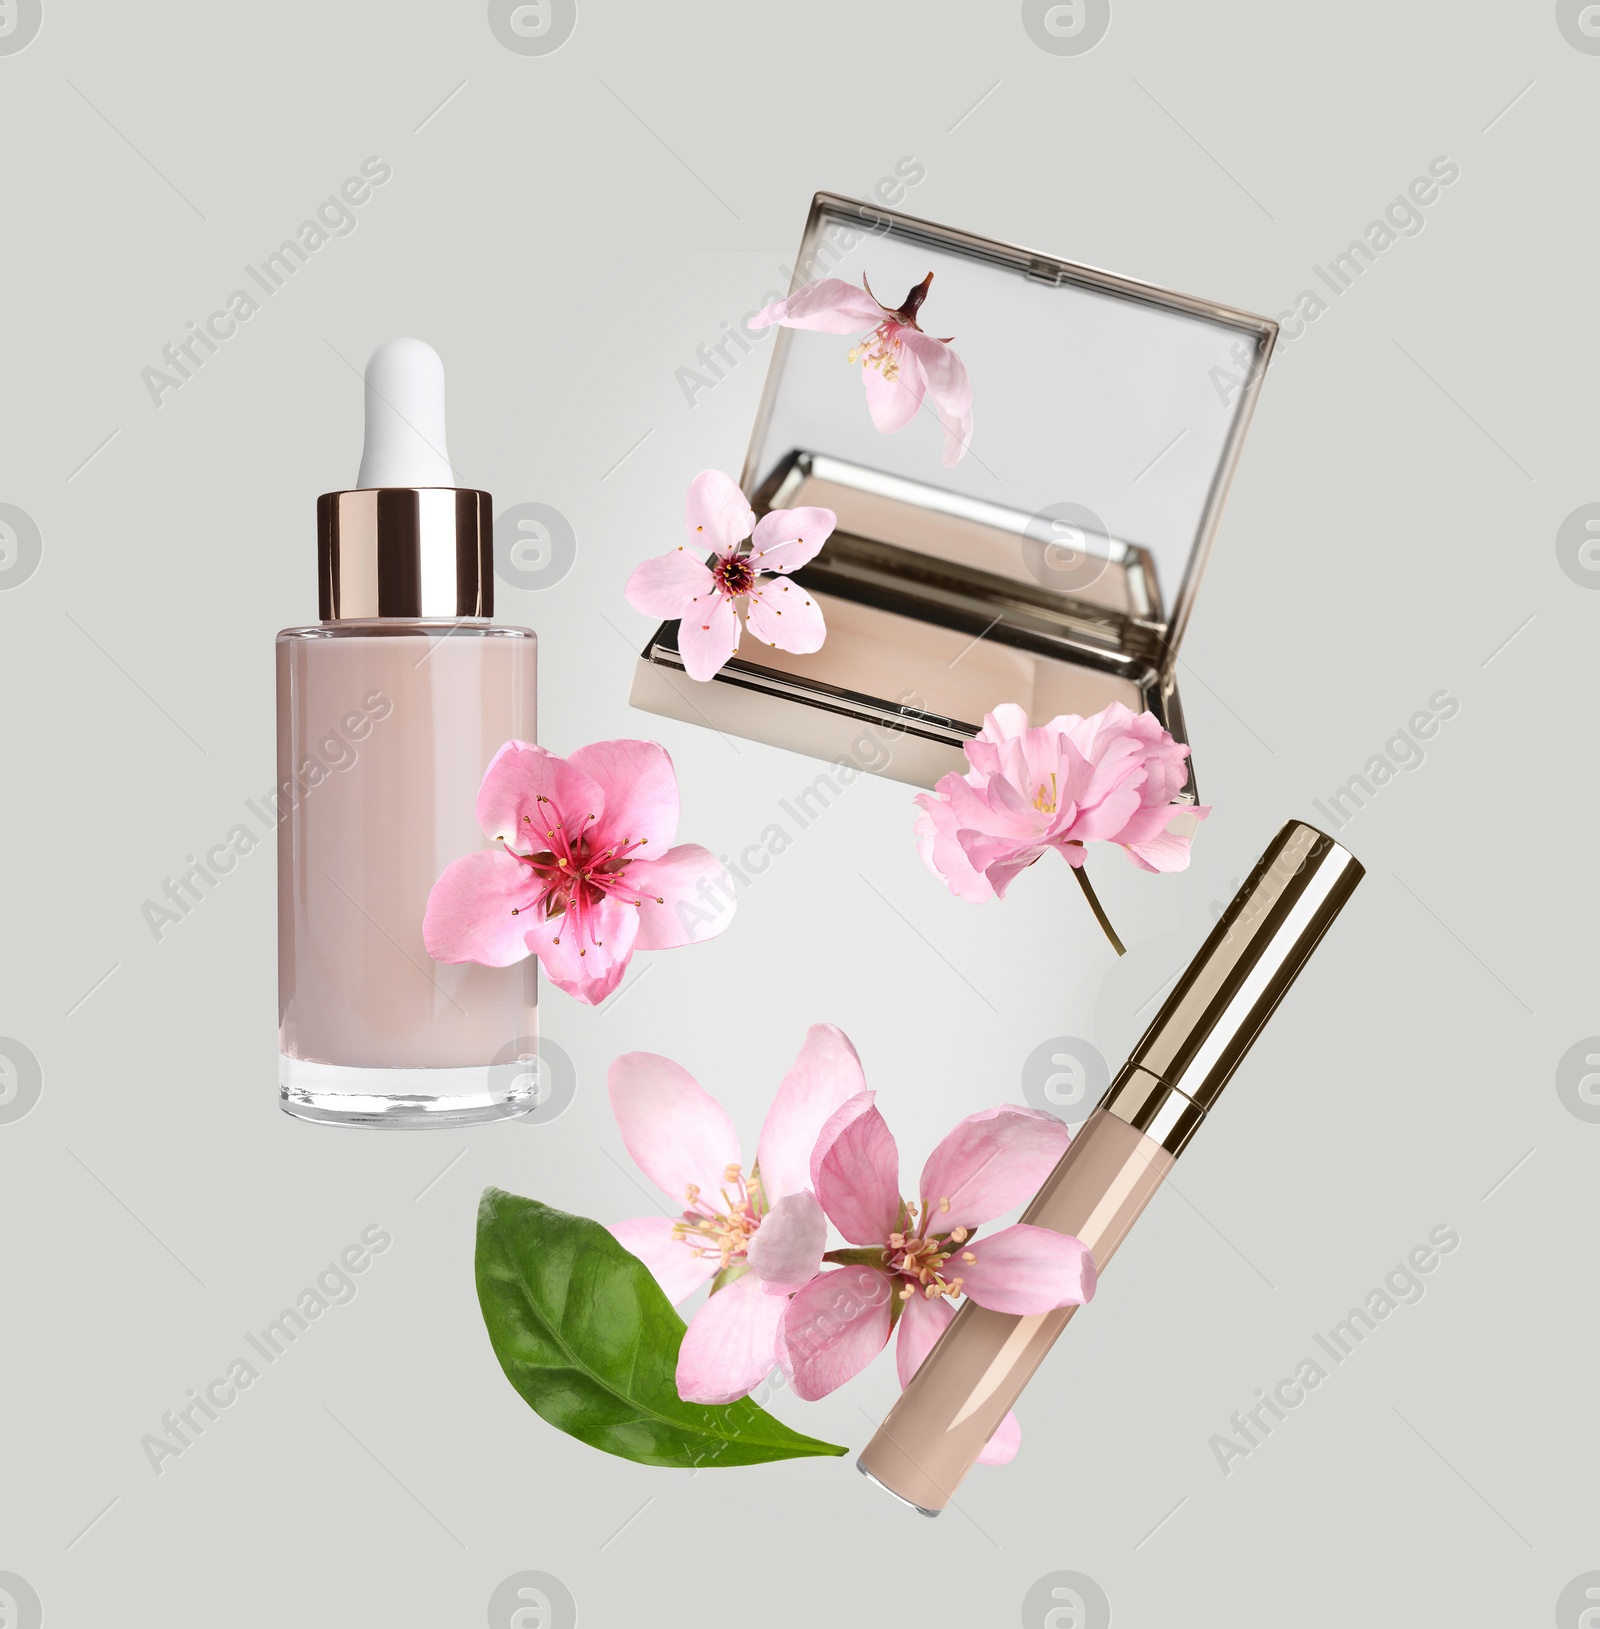 Image of Spring flowers and makeup products in air on light grey background